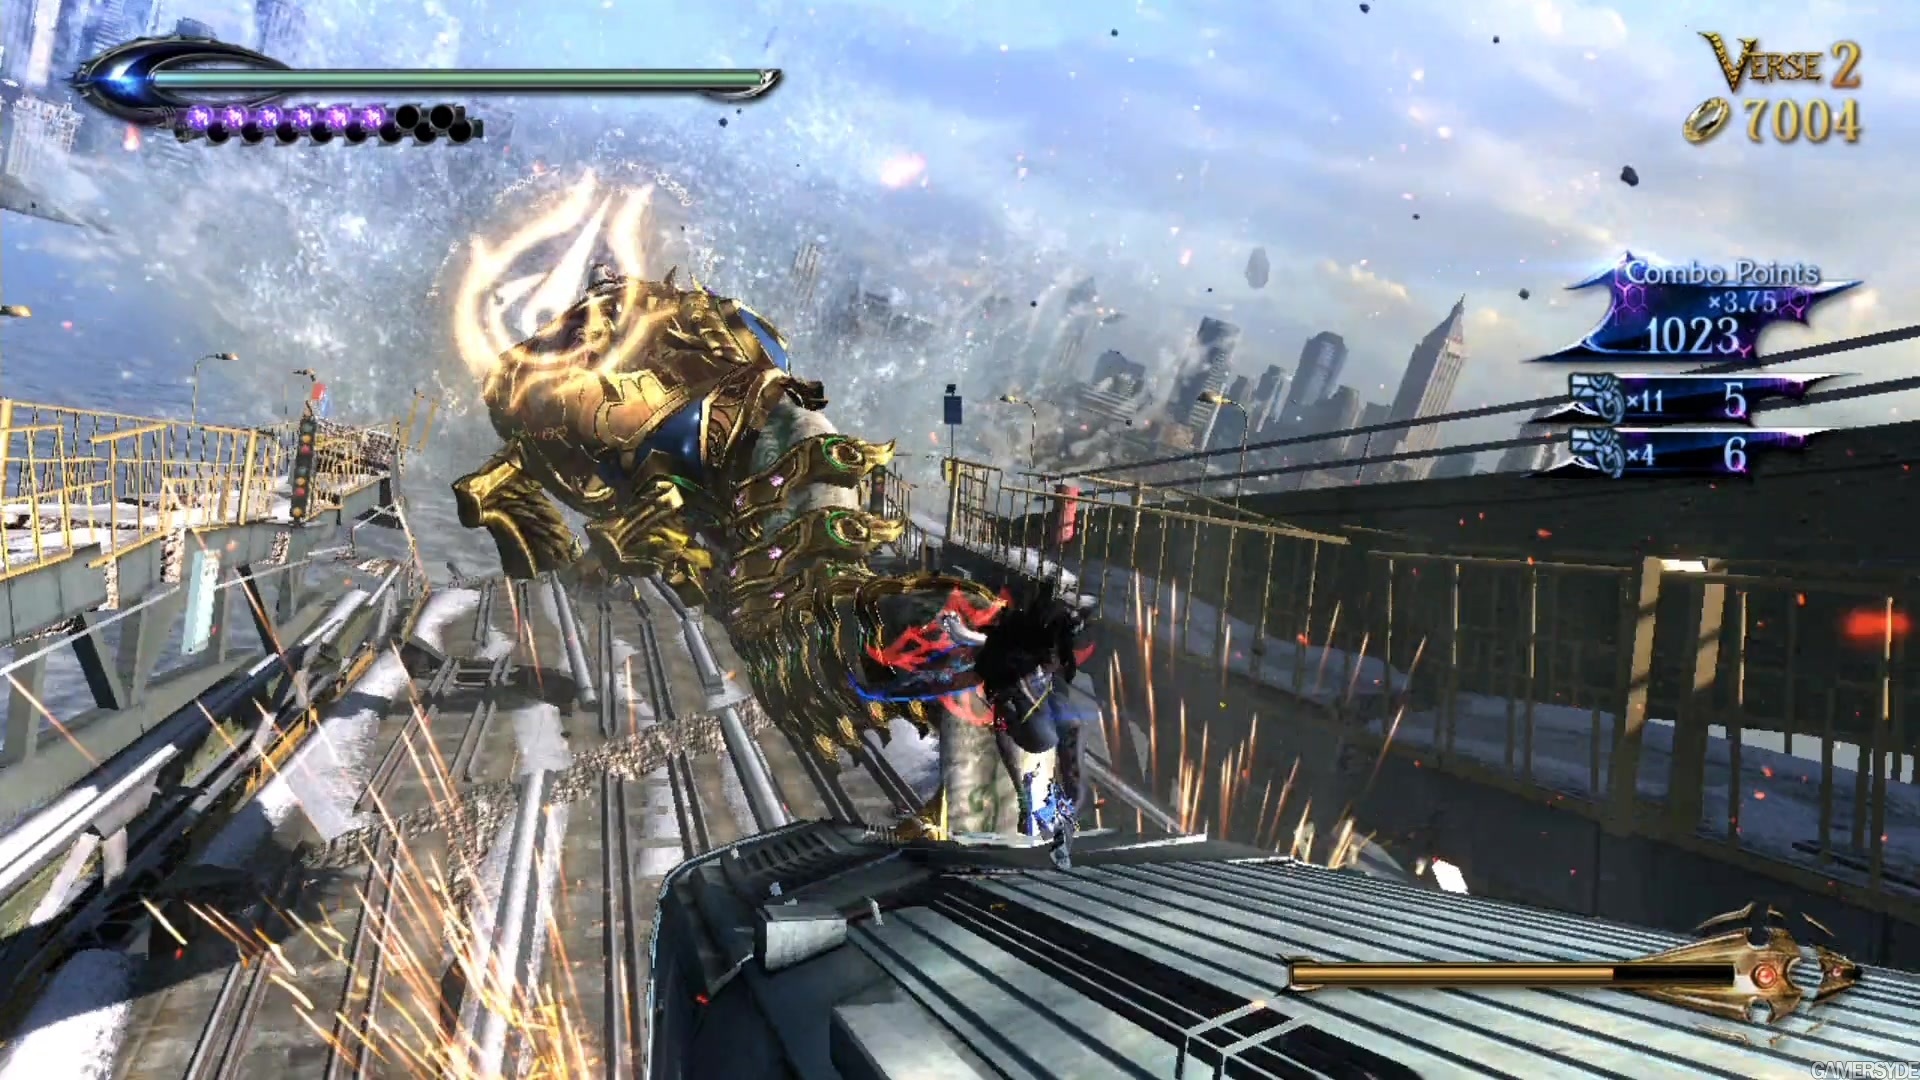 download bayonetta 2 switch for free